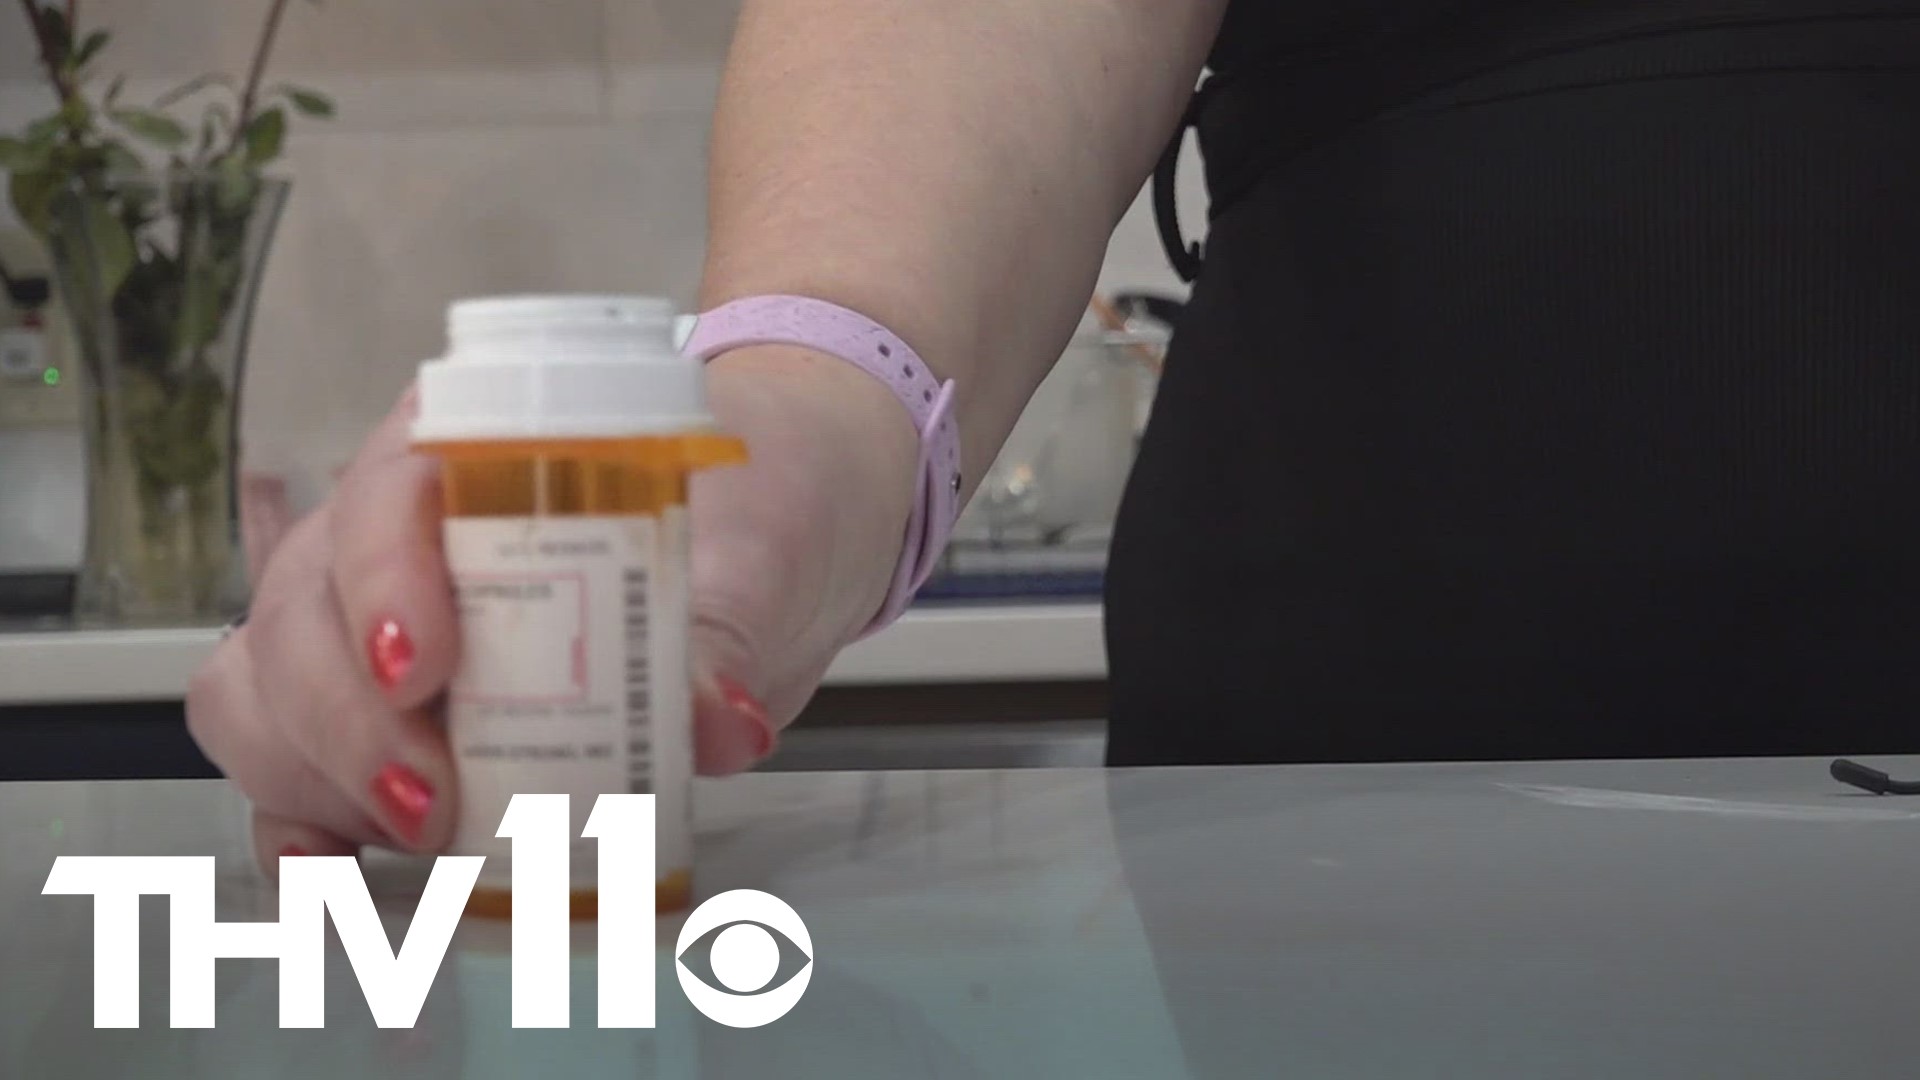 The demand for ADHD meds has increased but the supply of the stimulants is still a stubborn issue. We're taking a look at how this impacts people here in Arkansas.